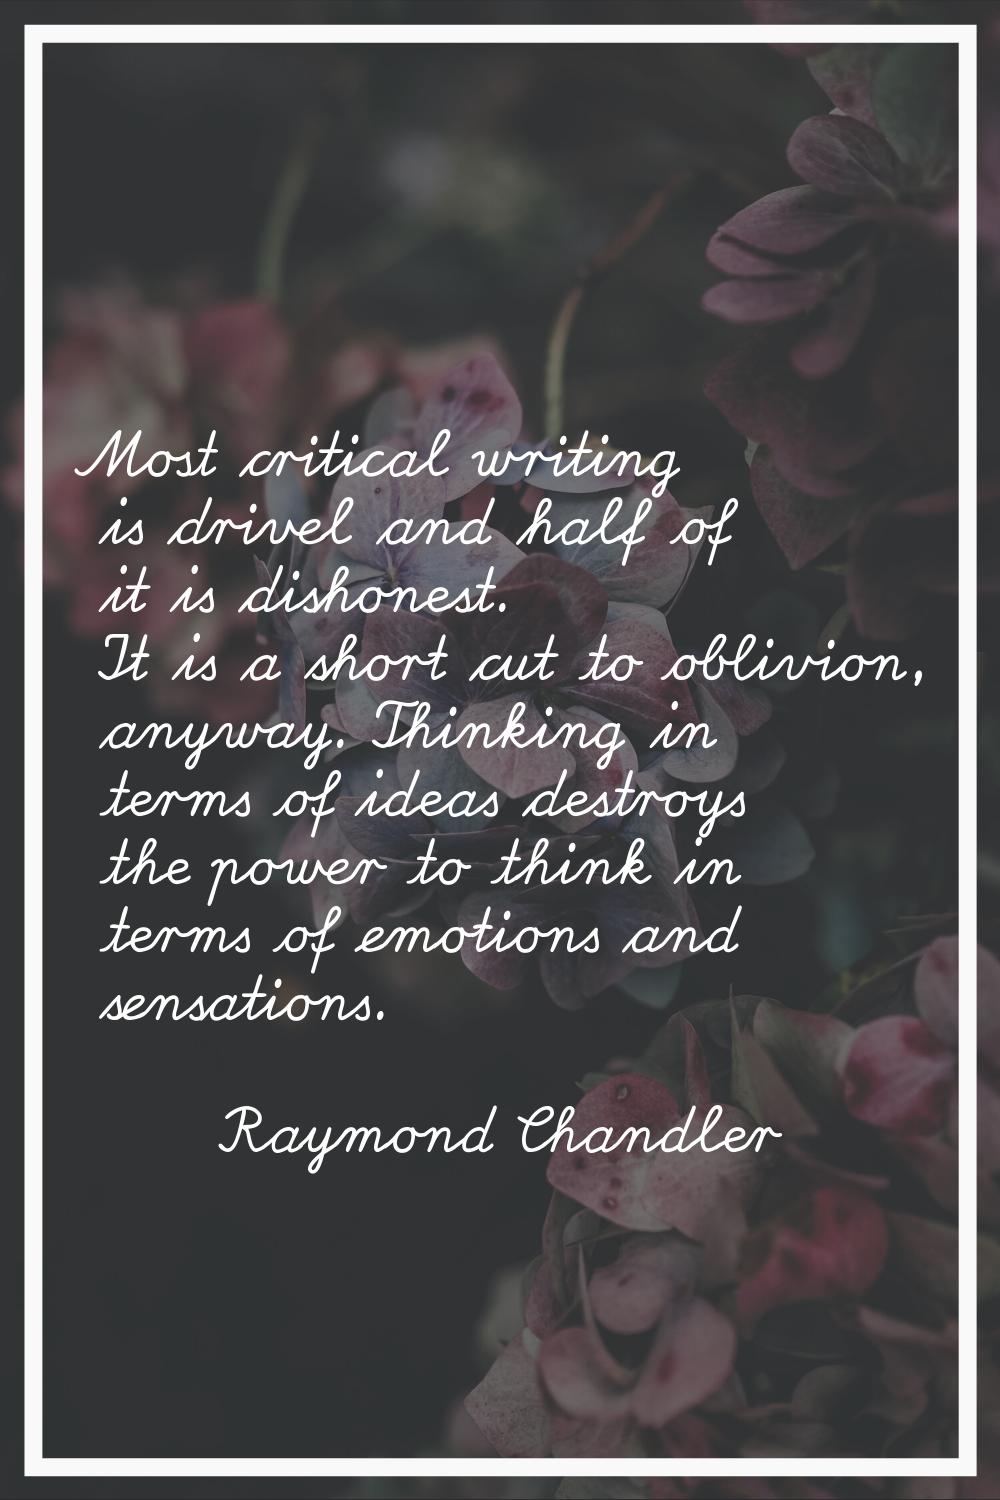 Most critical writing is drivel and half of it is dishonest. It is a short cut to oblivion, anyway.